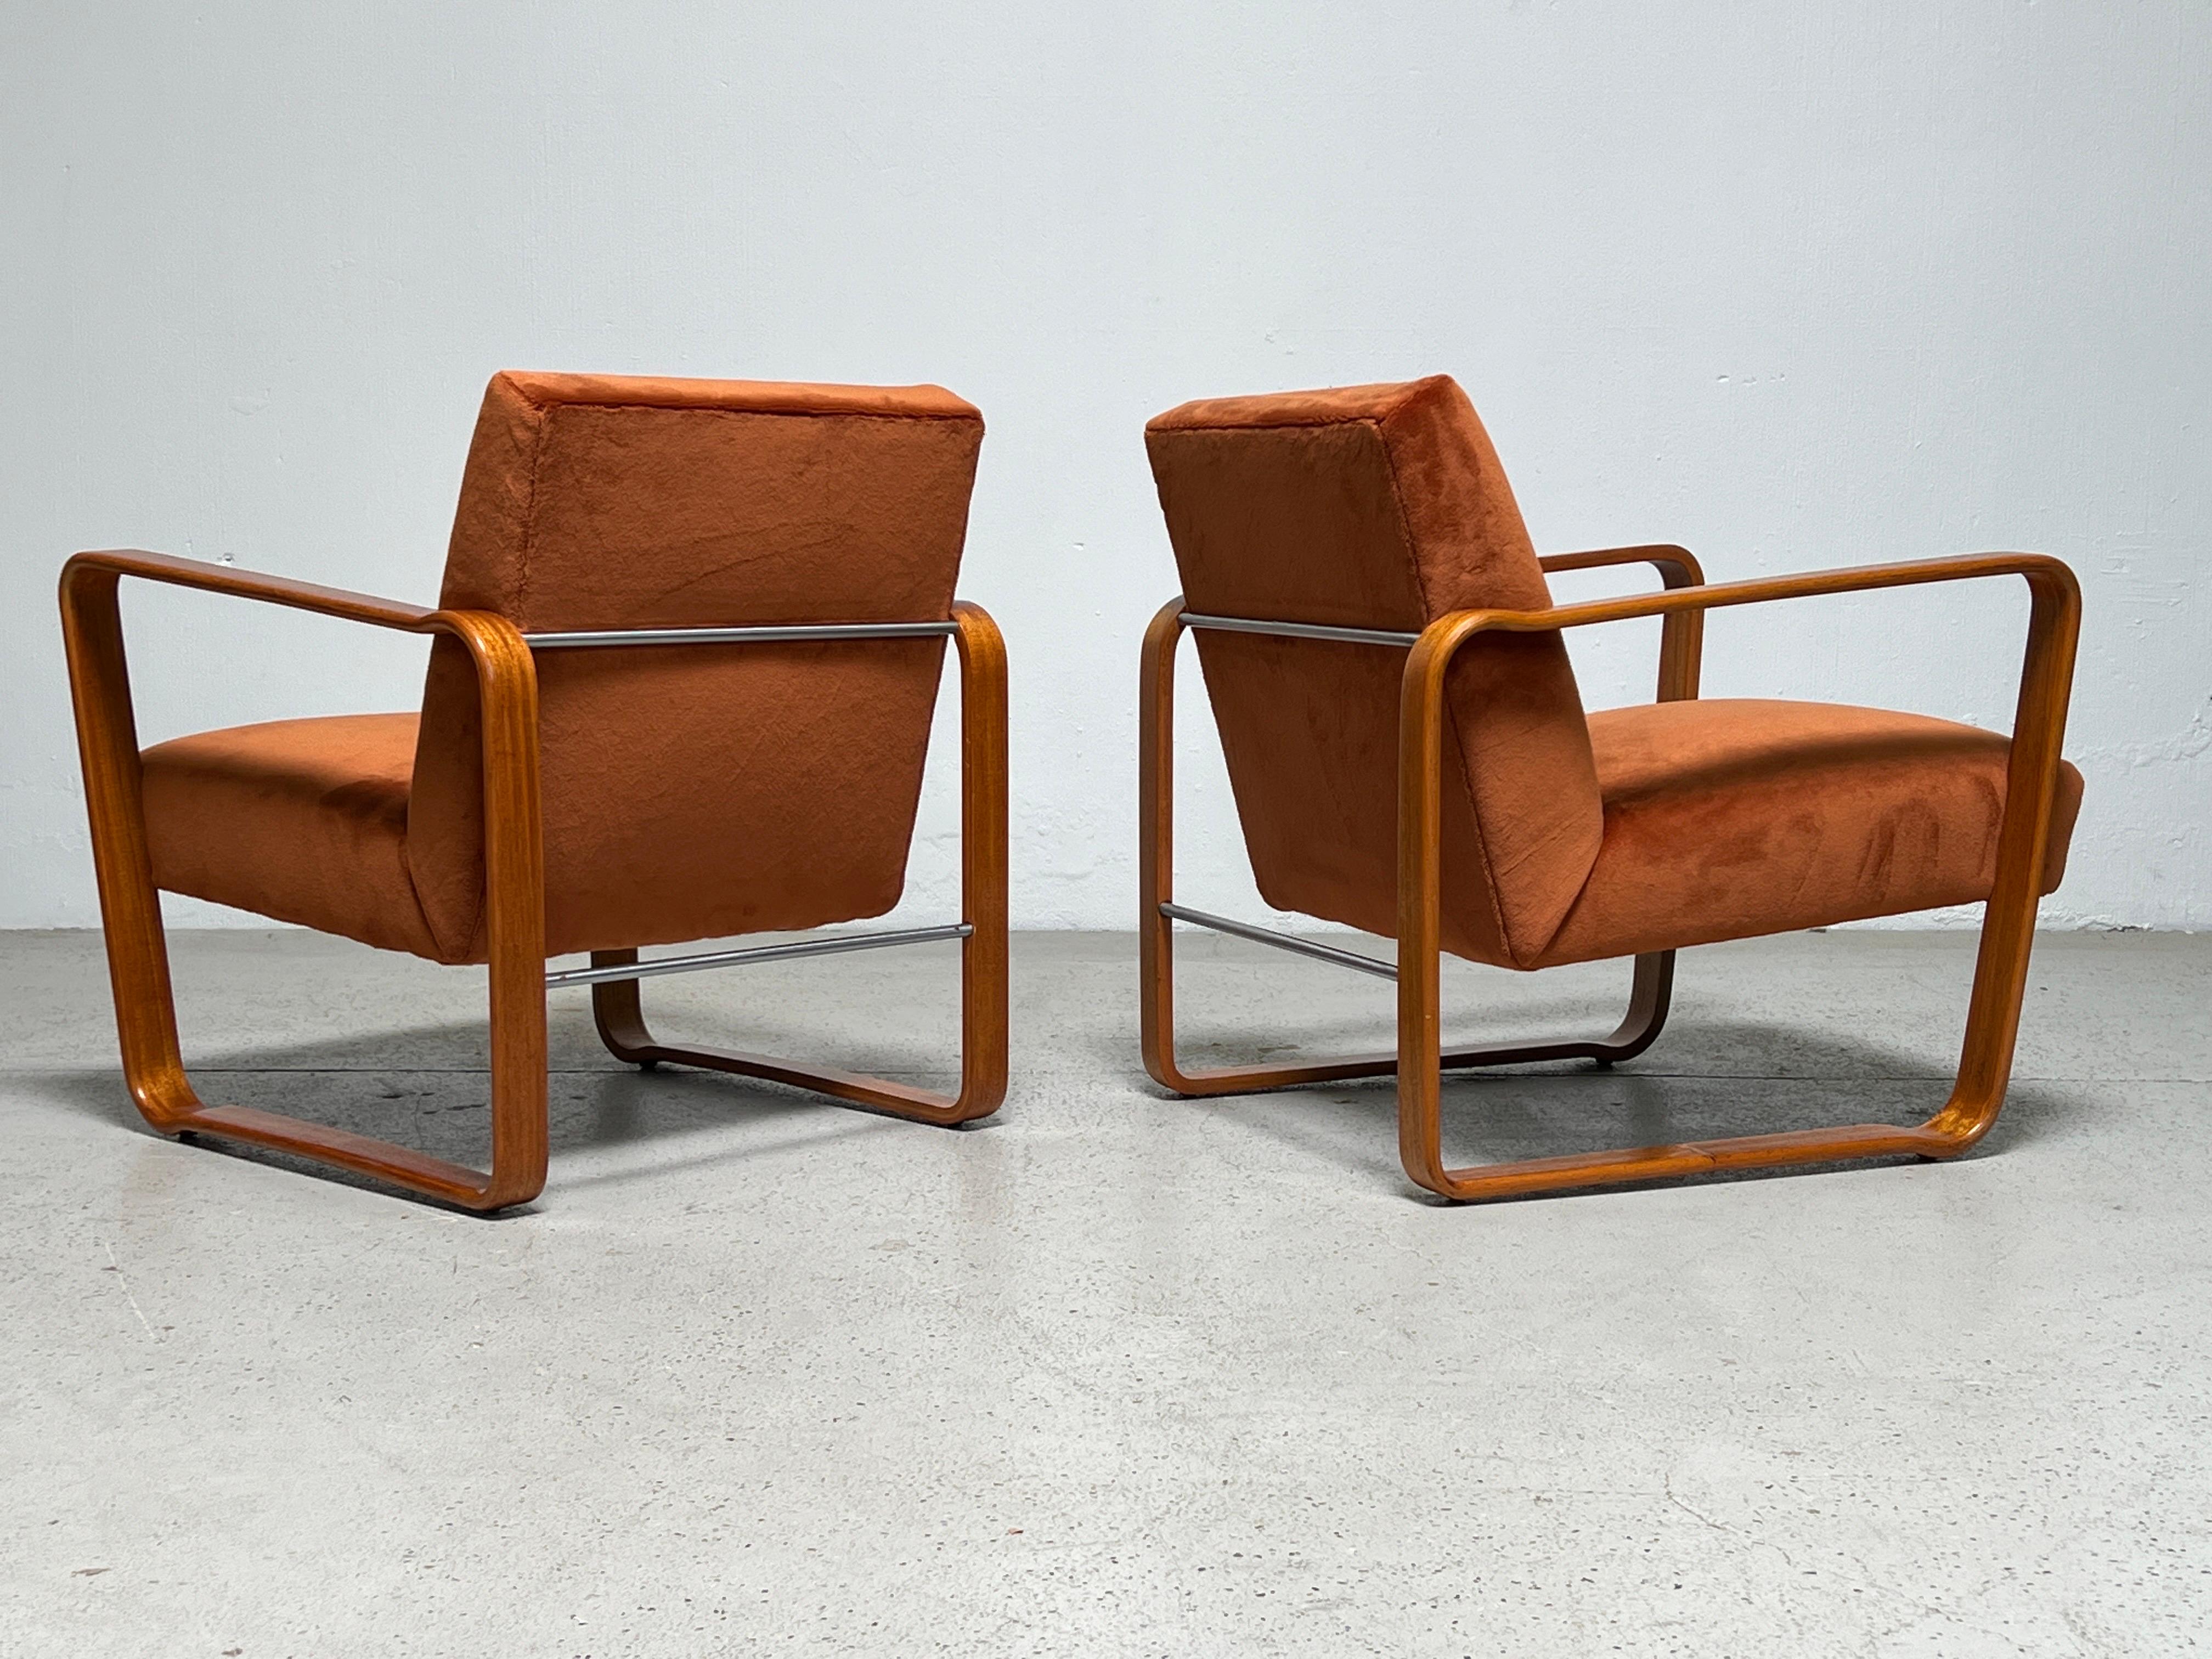 Mid-20th Century Pair of Tank Chairs by Edward Wormley for Dunbar